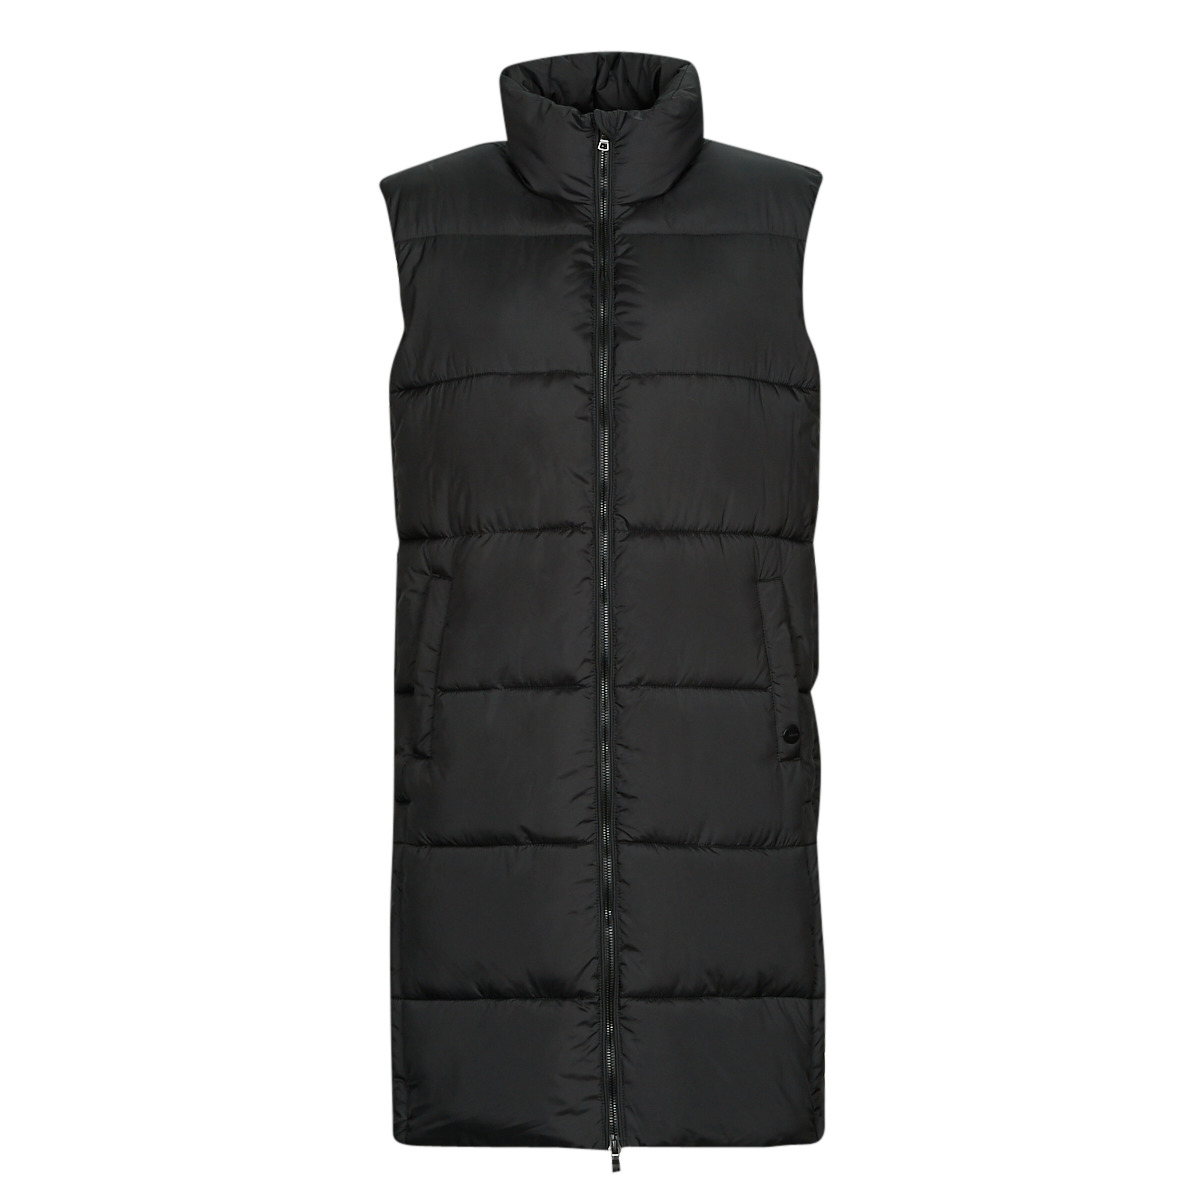 Superdry STUDIOS LONGLINE QUILTED - black Spartoo Fast Europe 105,60 GILET delivery ! Duffel € | - Clothing Women coats